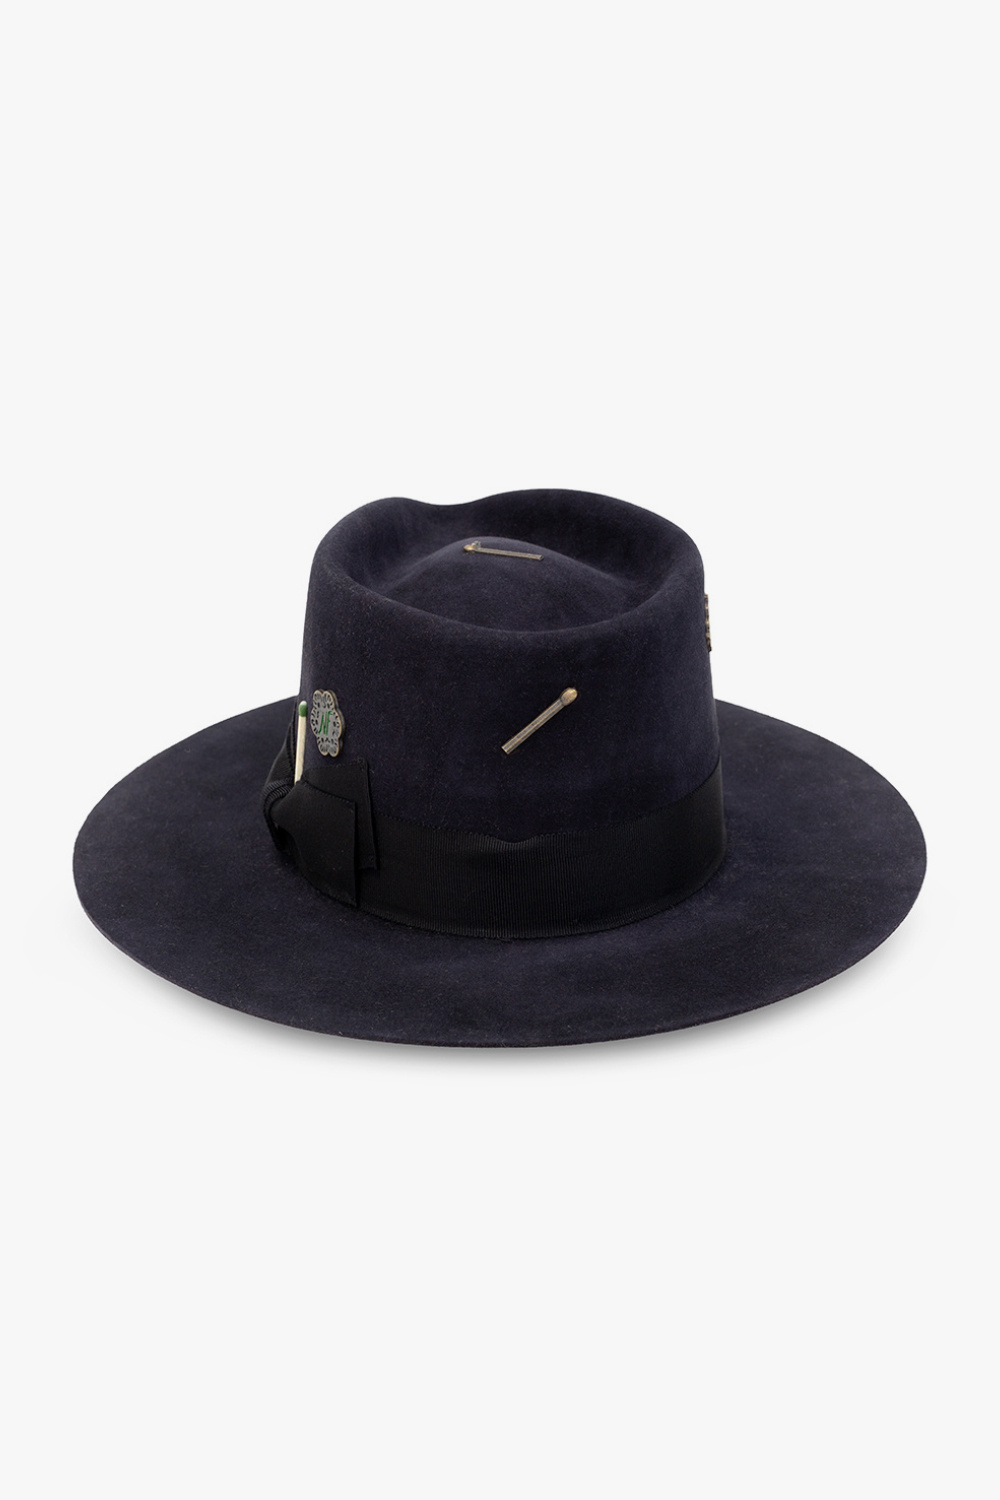 Nick Fouquet ‘Cenote’ these hat with bow